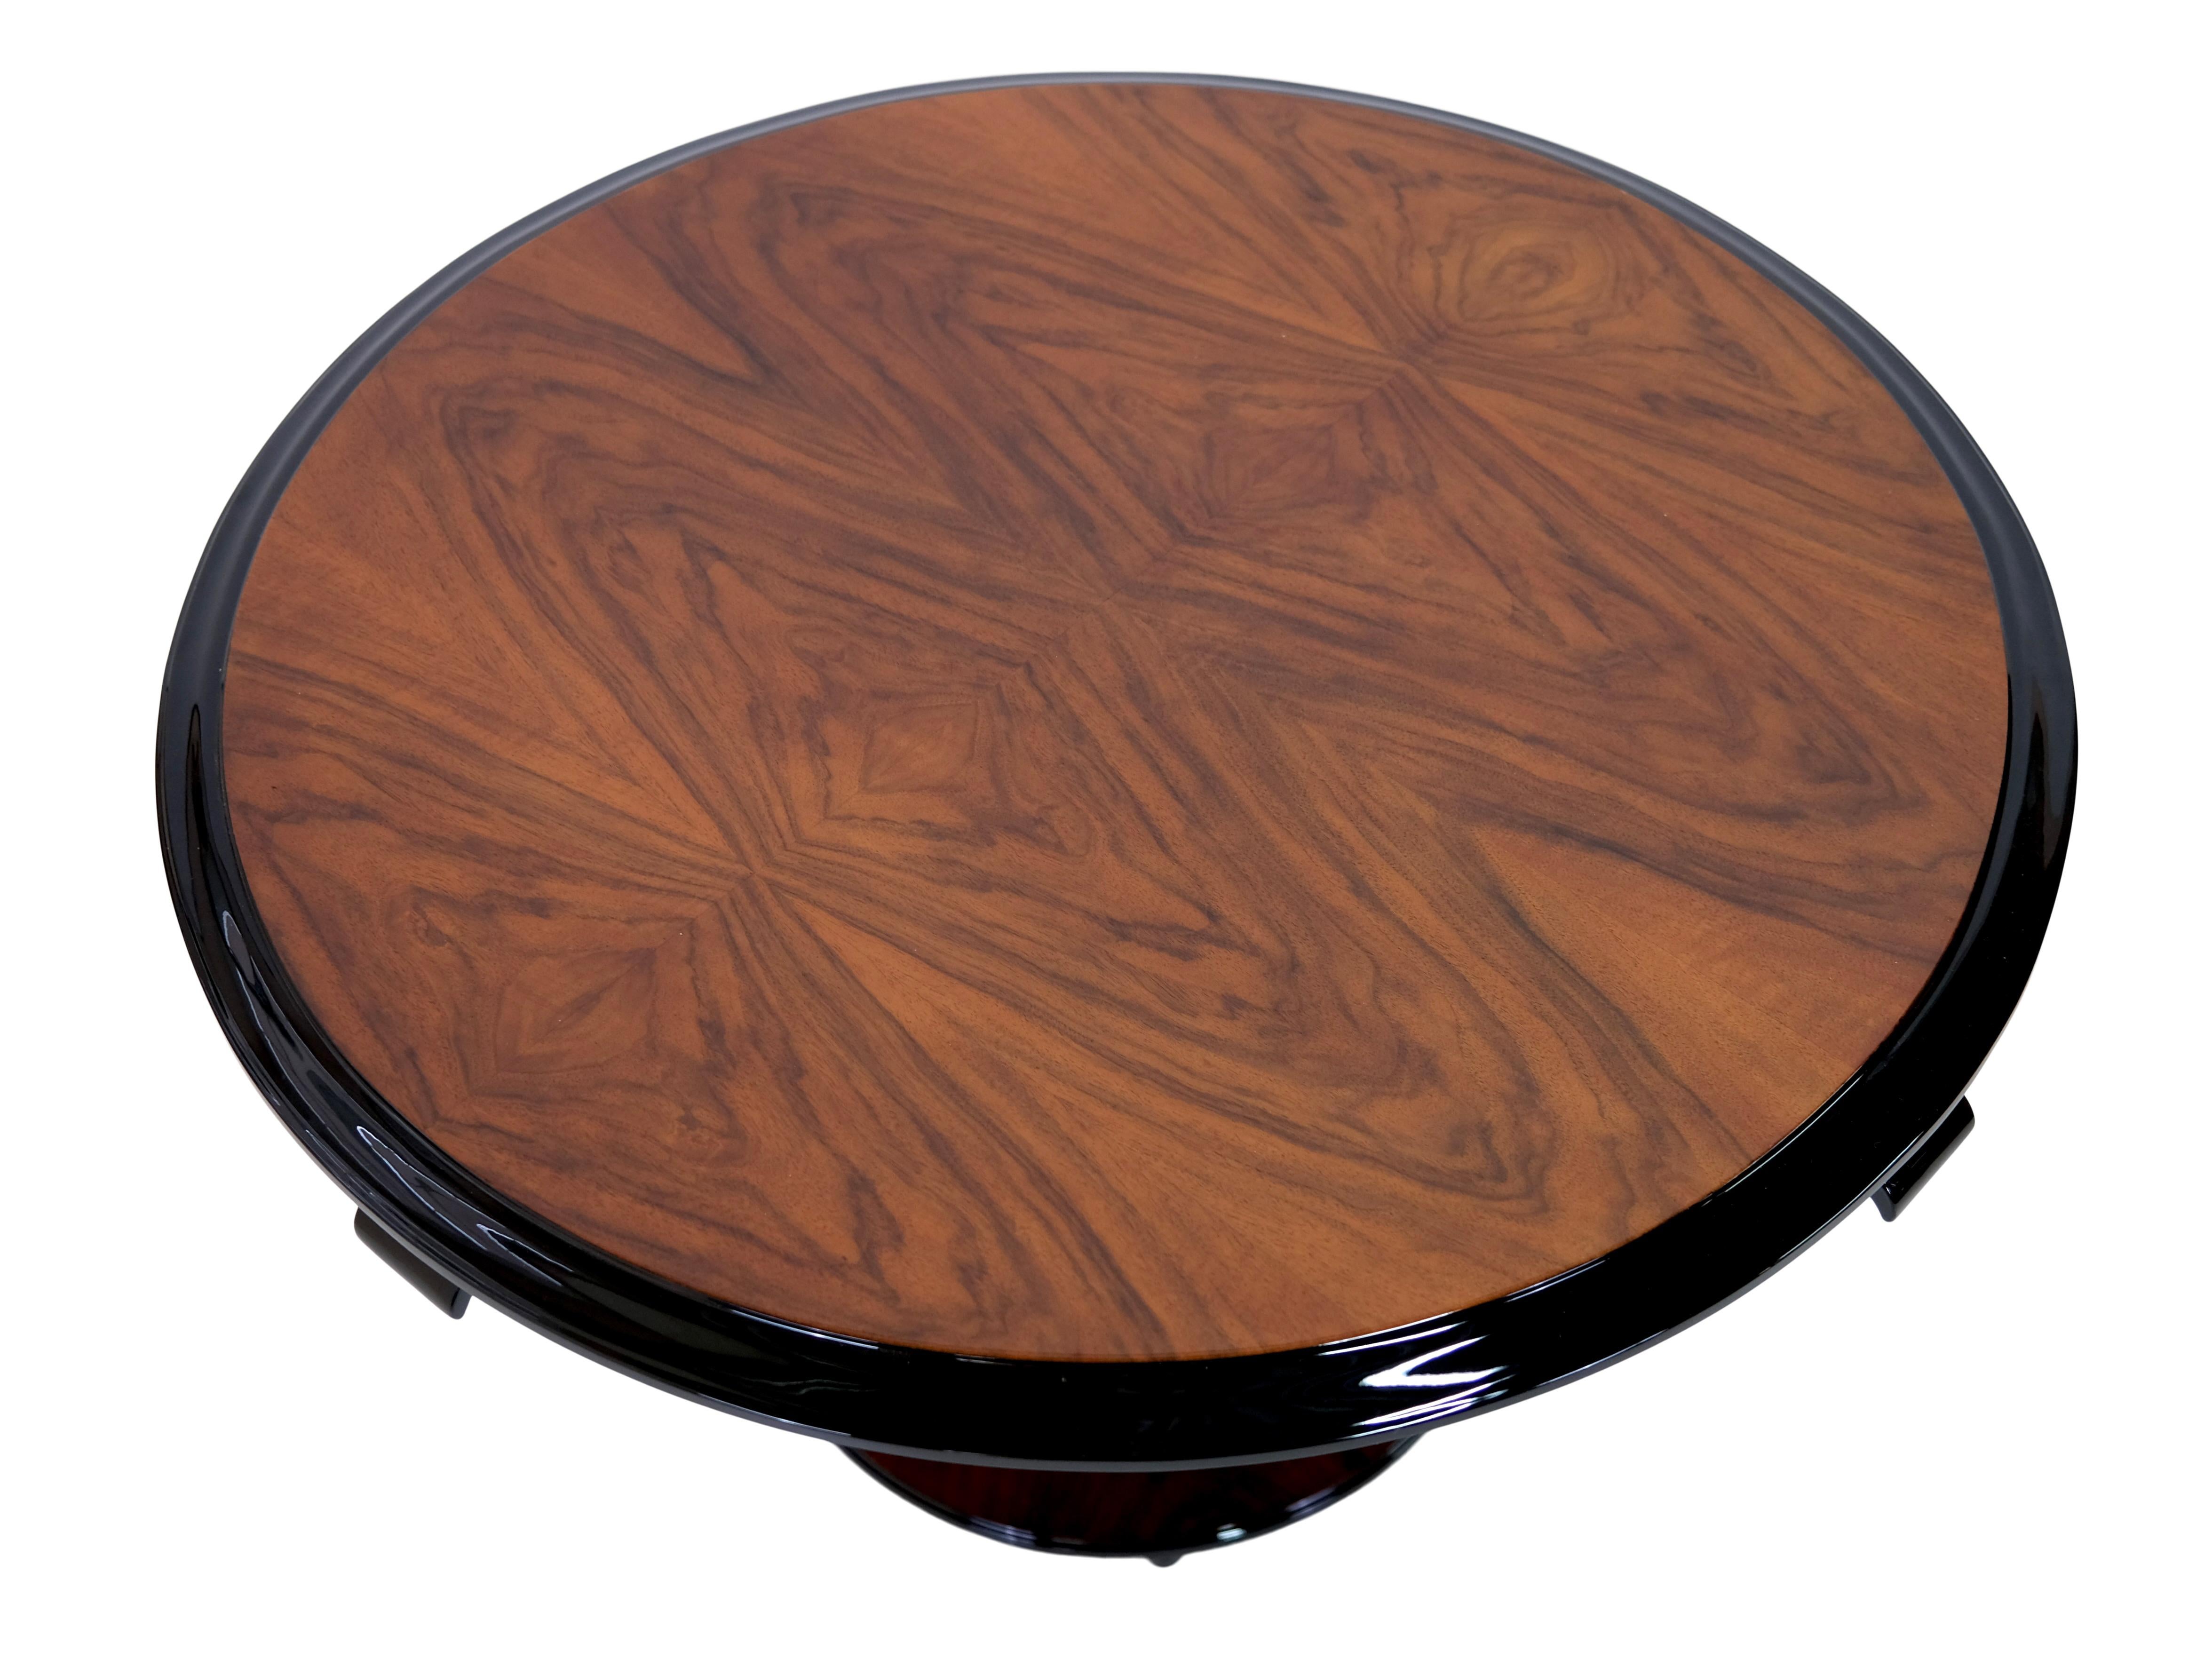 Wood French 1930s Art Deco Side Table with Nutwood Veneer and Black Lacquer